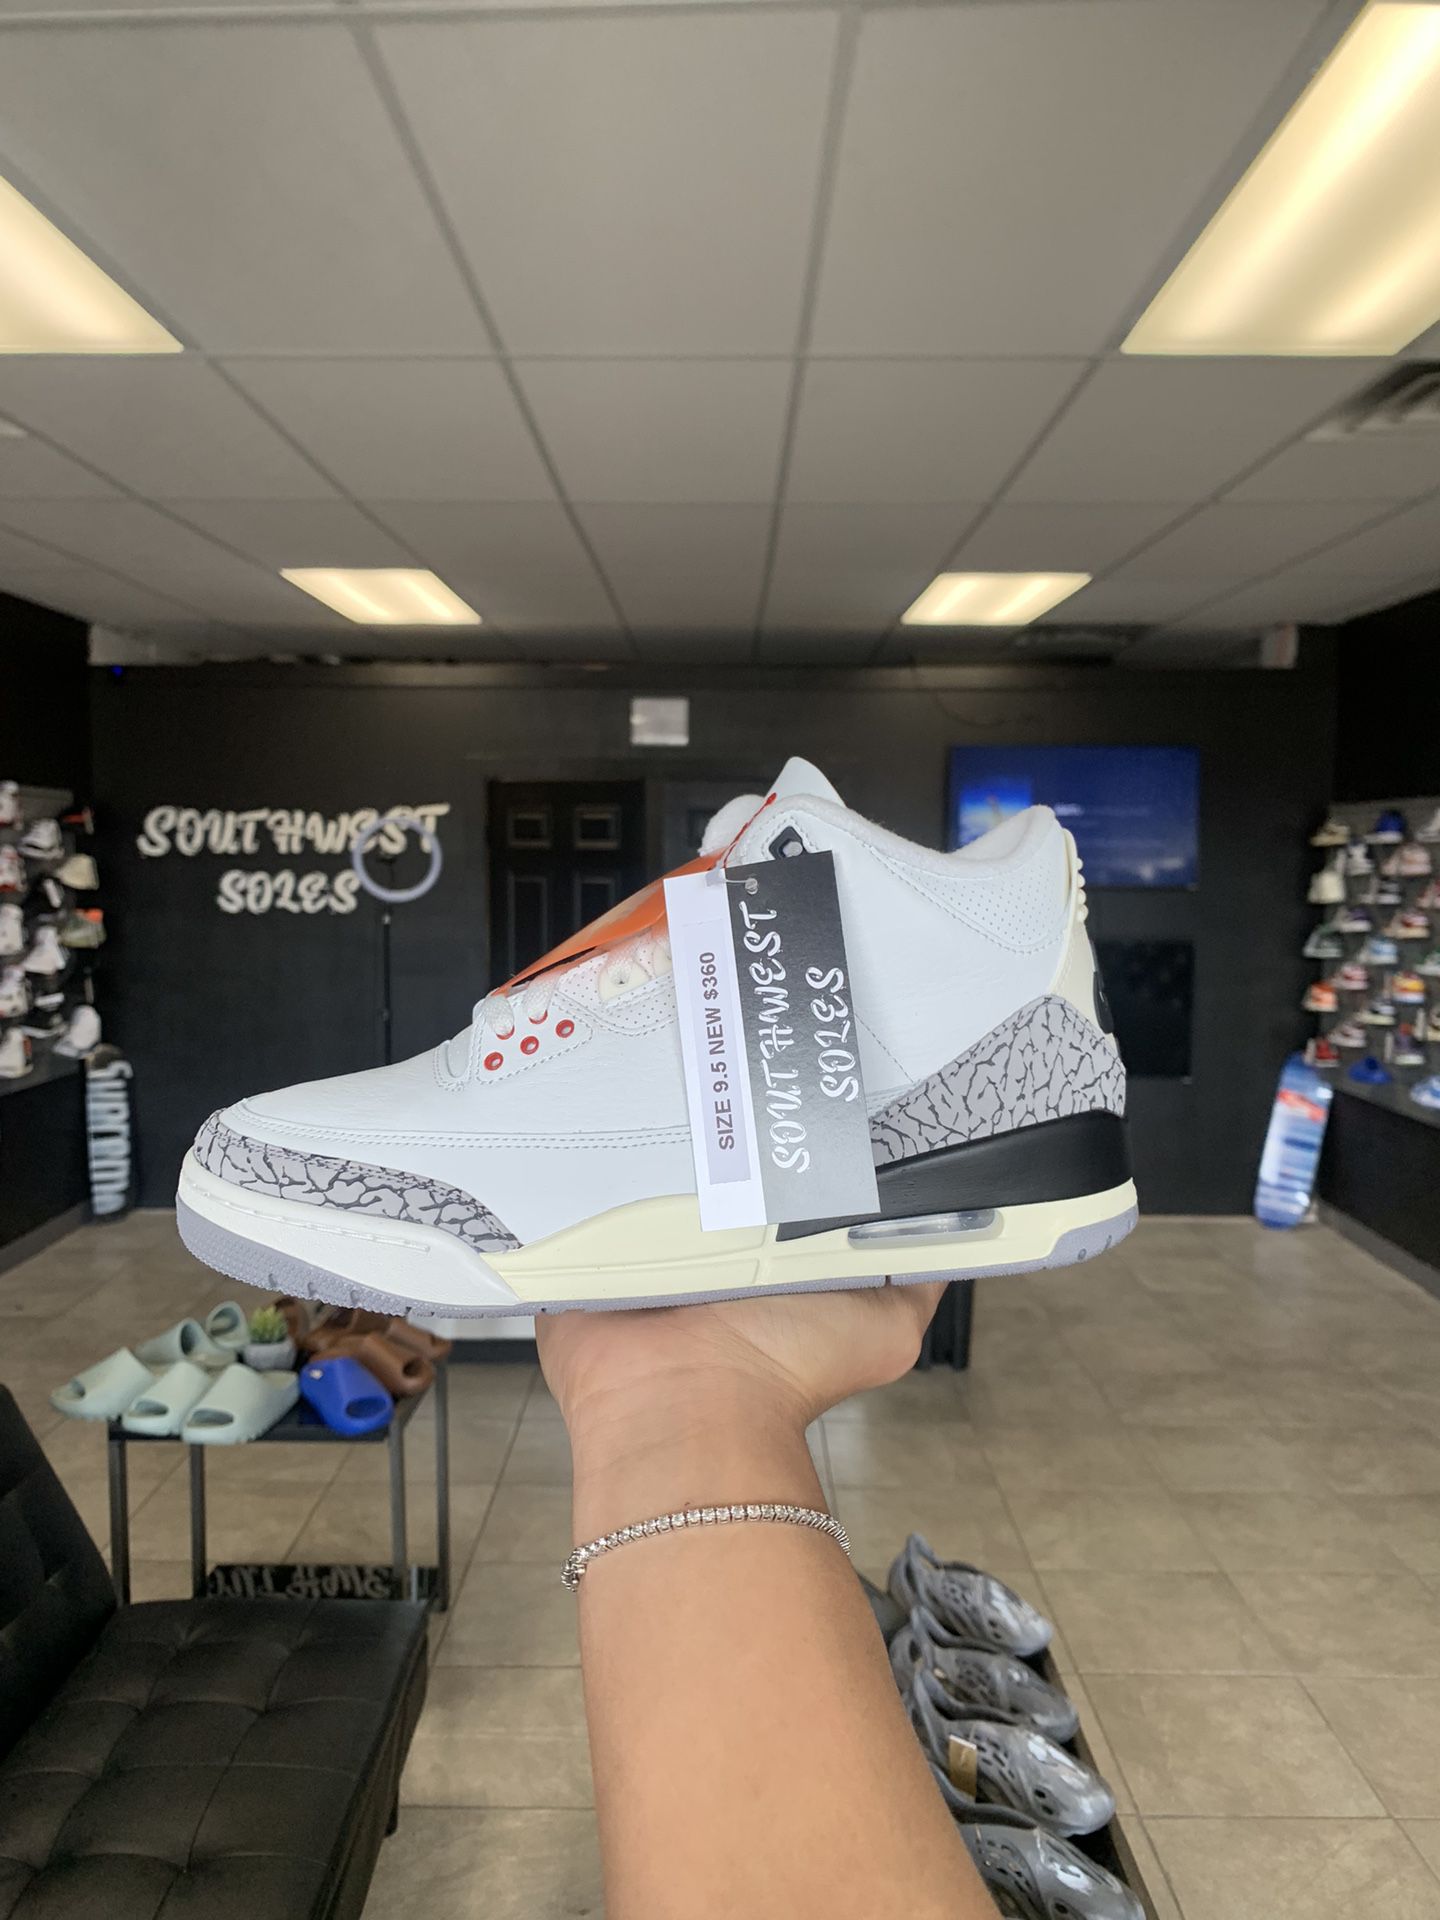 Jordan 3 White Cement Reimagined Size 9.5 Available In Store!